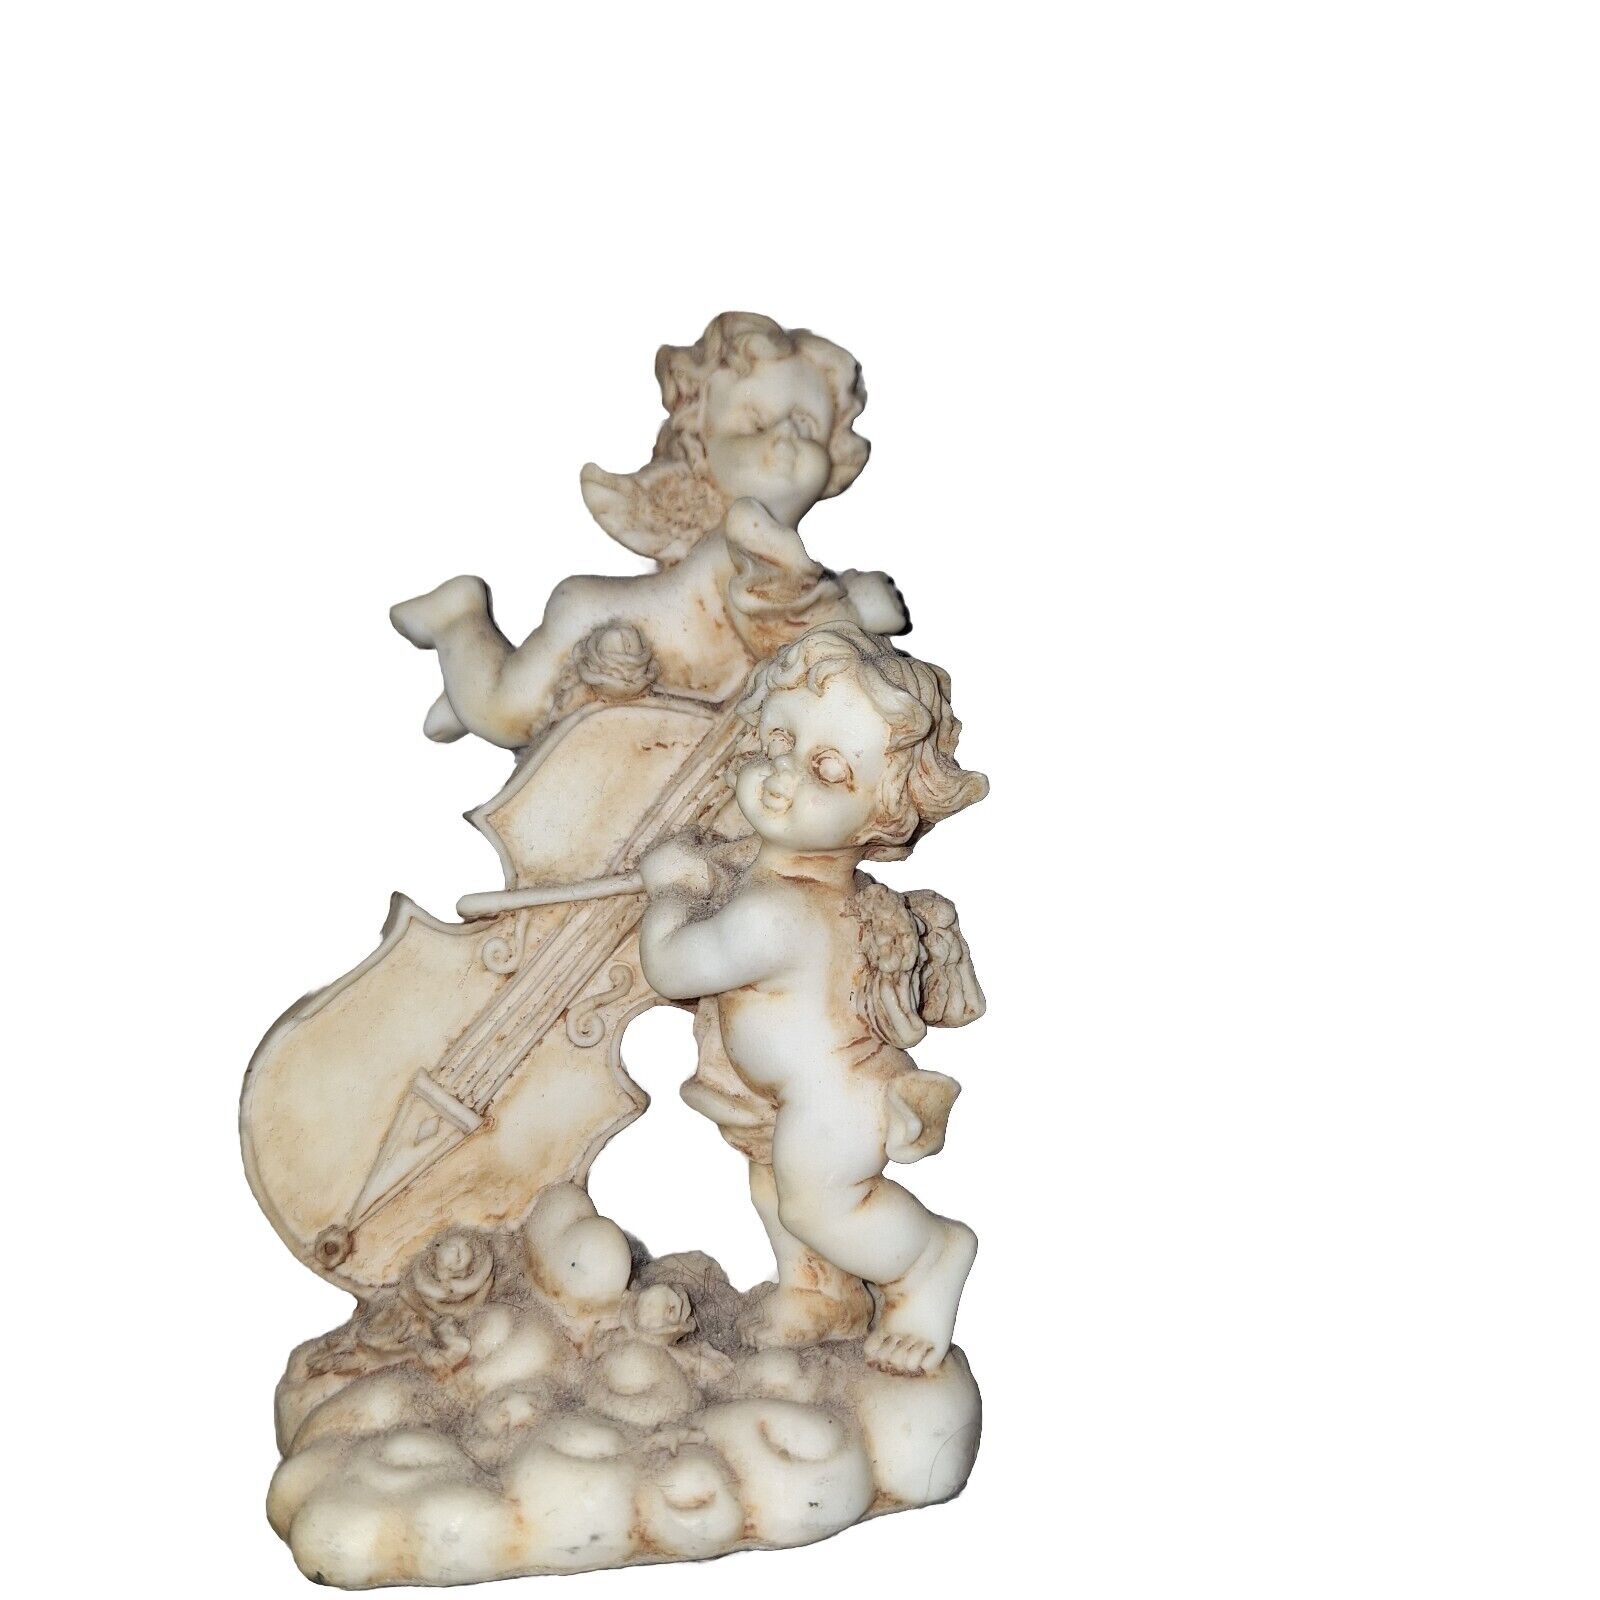 Vintage abstract statue of cherub angels playing music